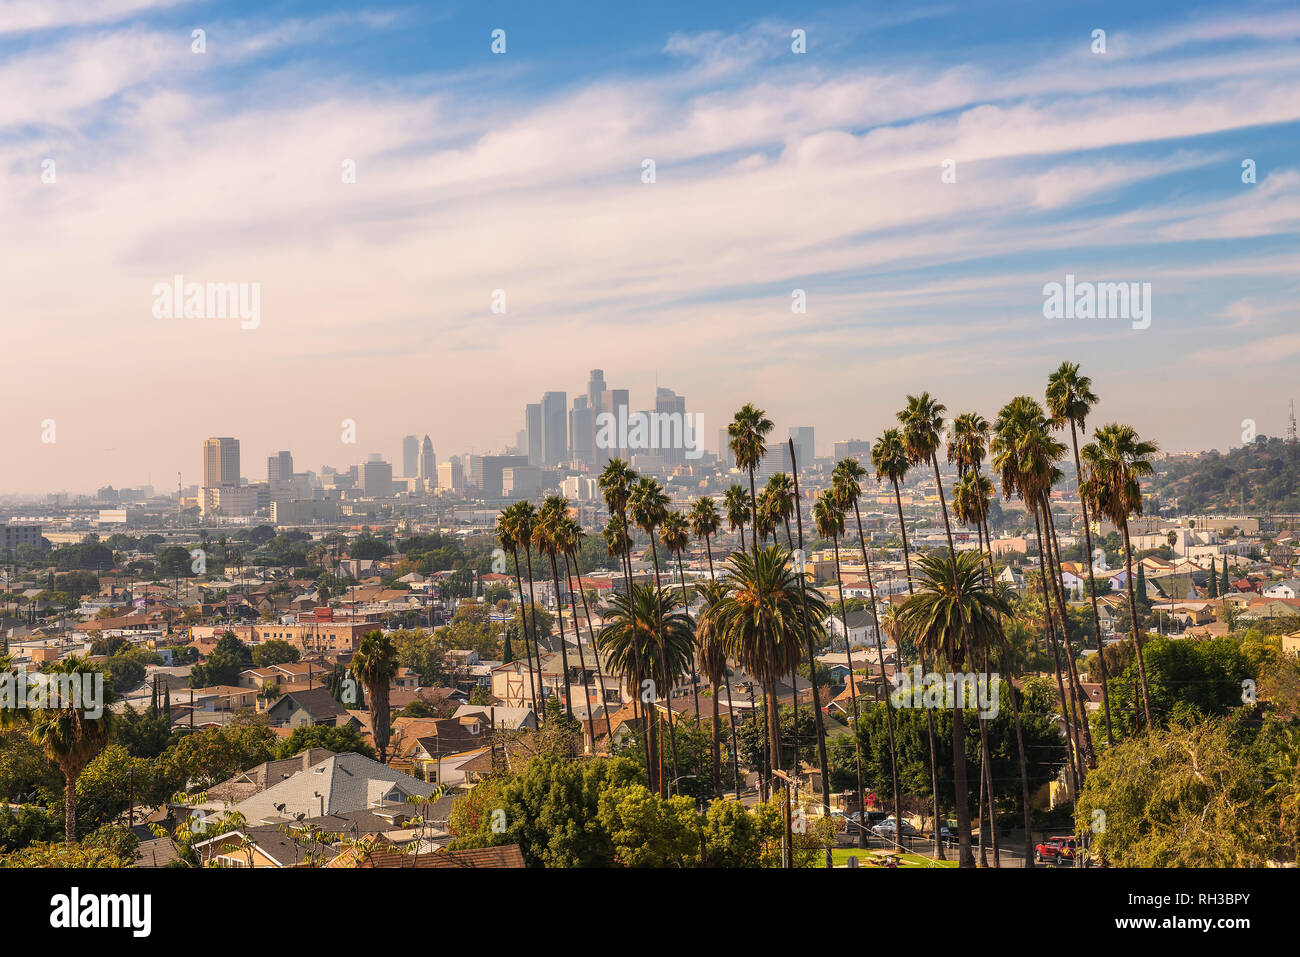 Los Angeles skyline at sunset with palm trees in the foreground Stock Photo